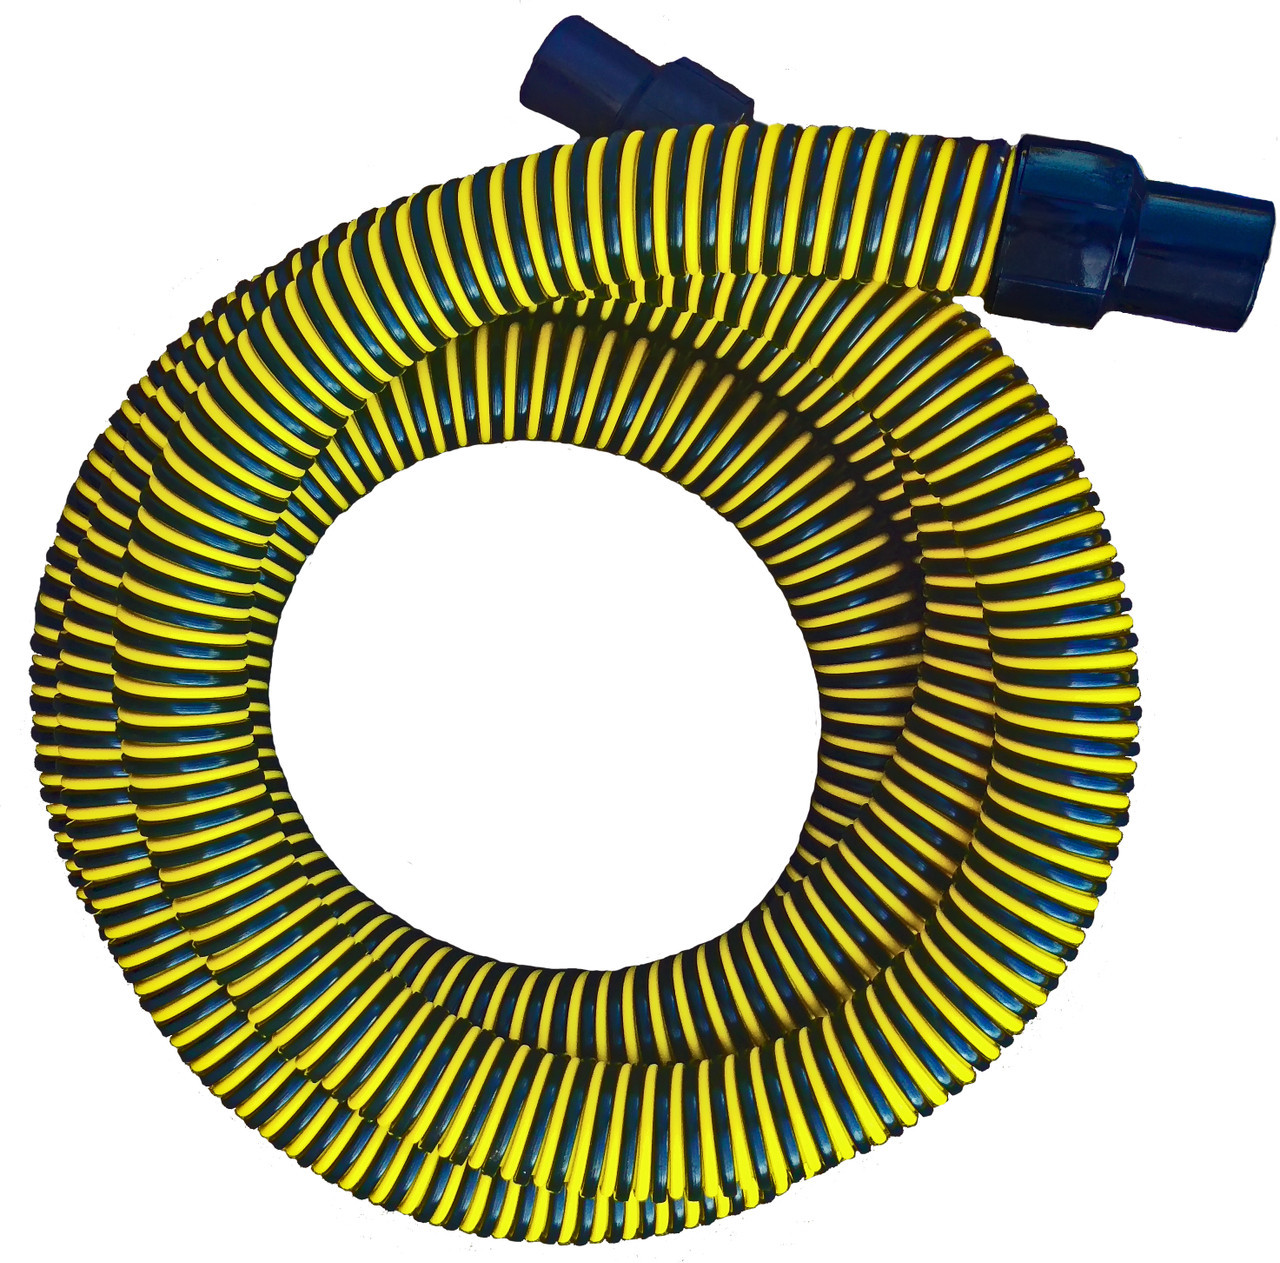 HI-VAC 2" X 25' SUCTION HOSE ASSEMBLY (POLY MALE/FEMALE COUPLERS)